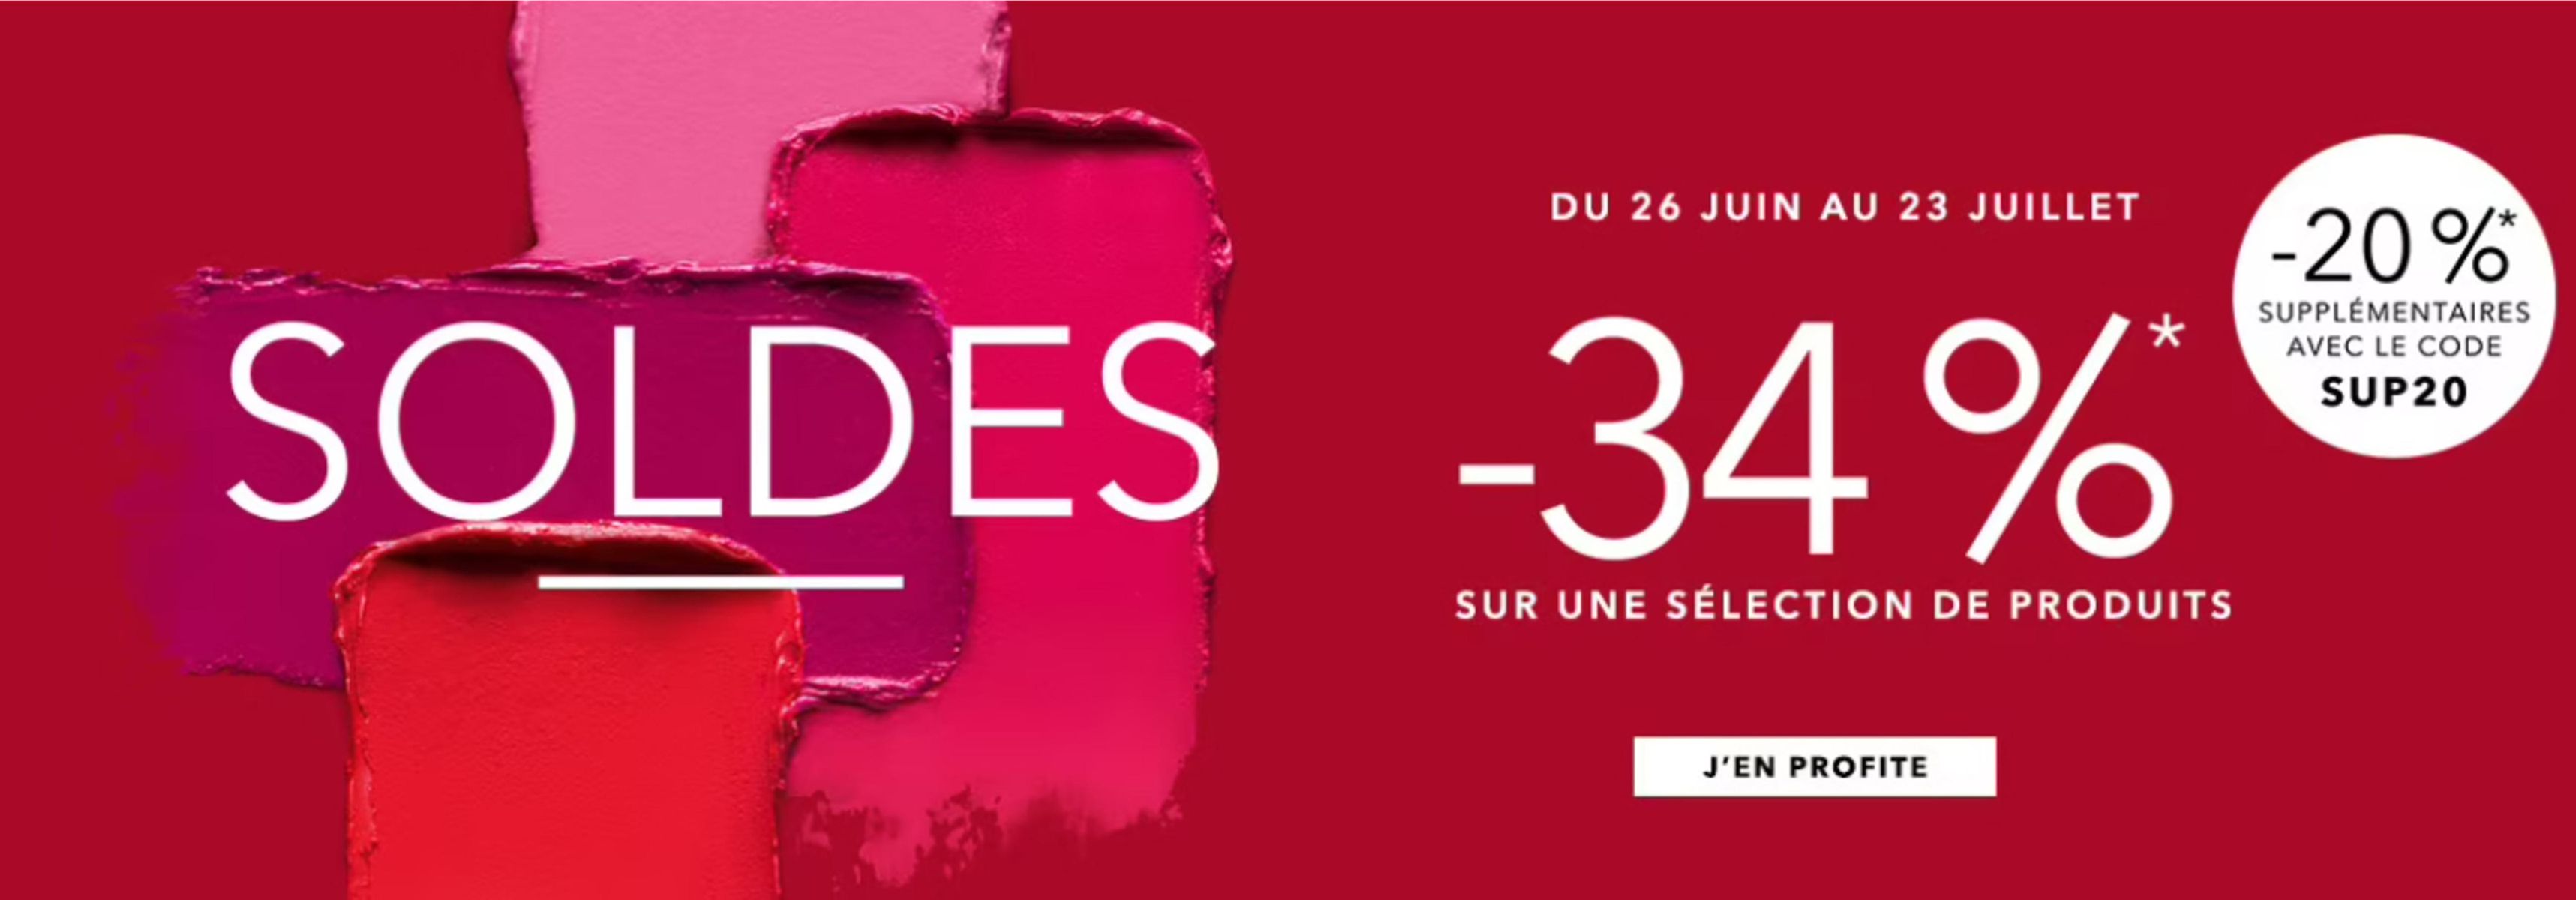 Catalogue Soldes -34%, page 00001